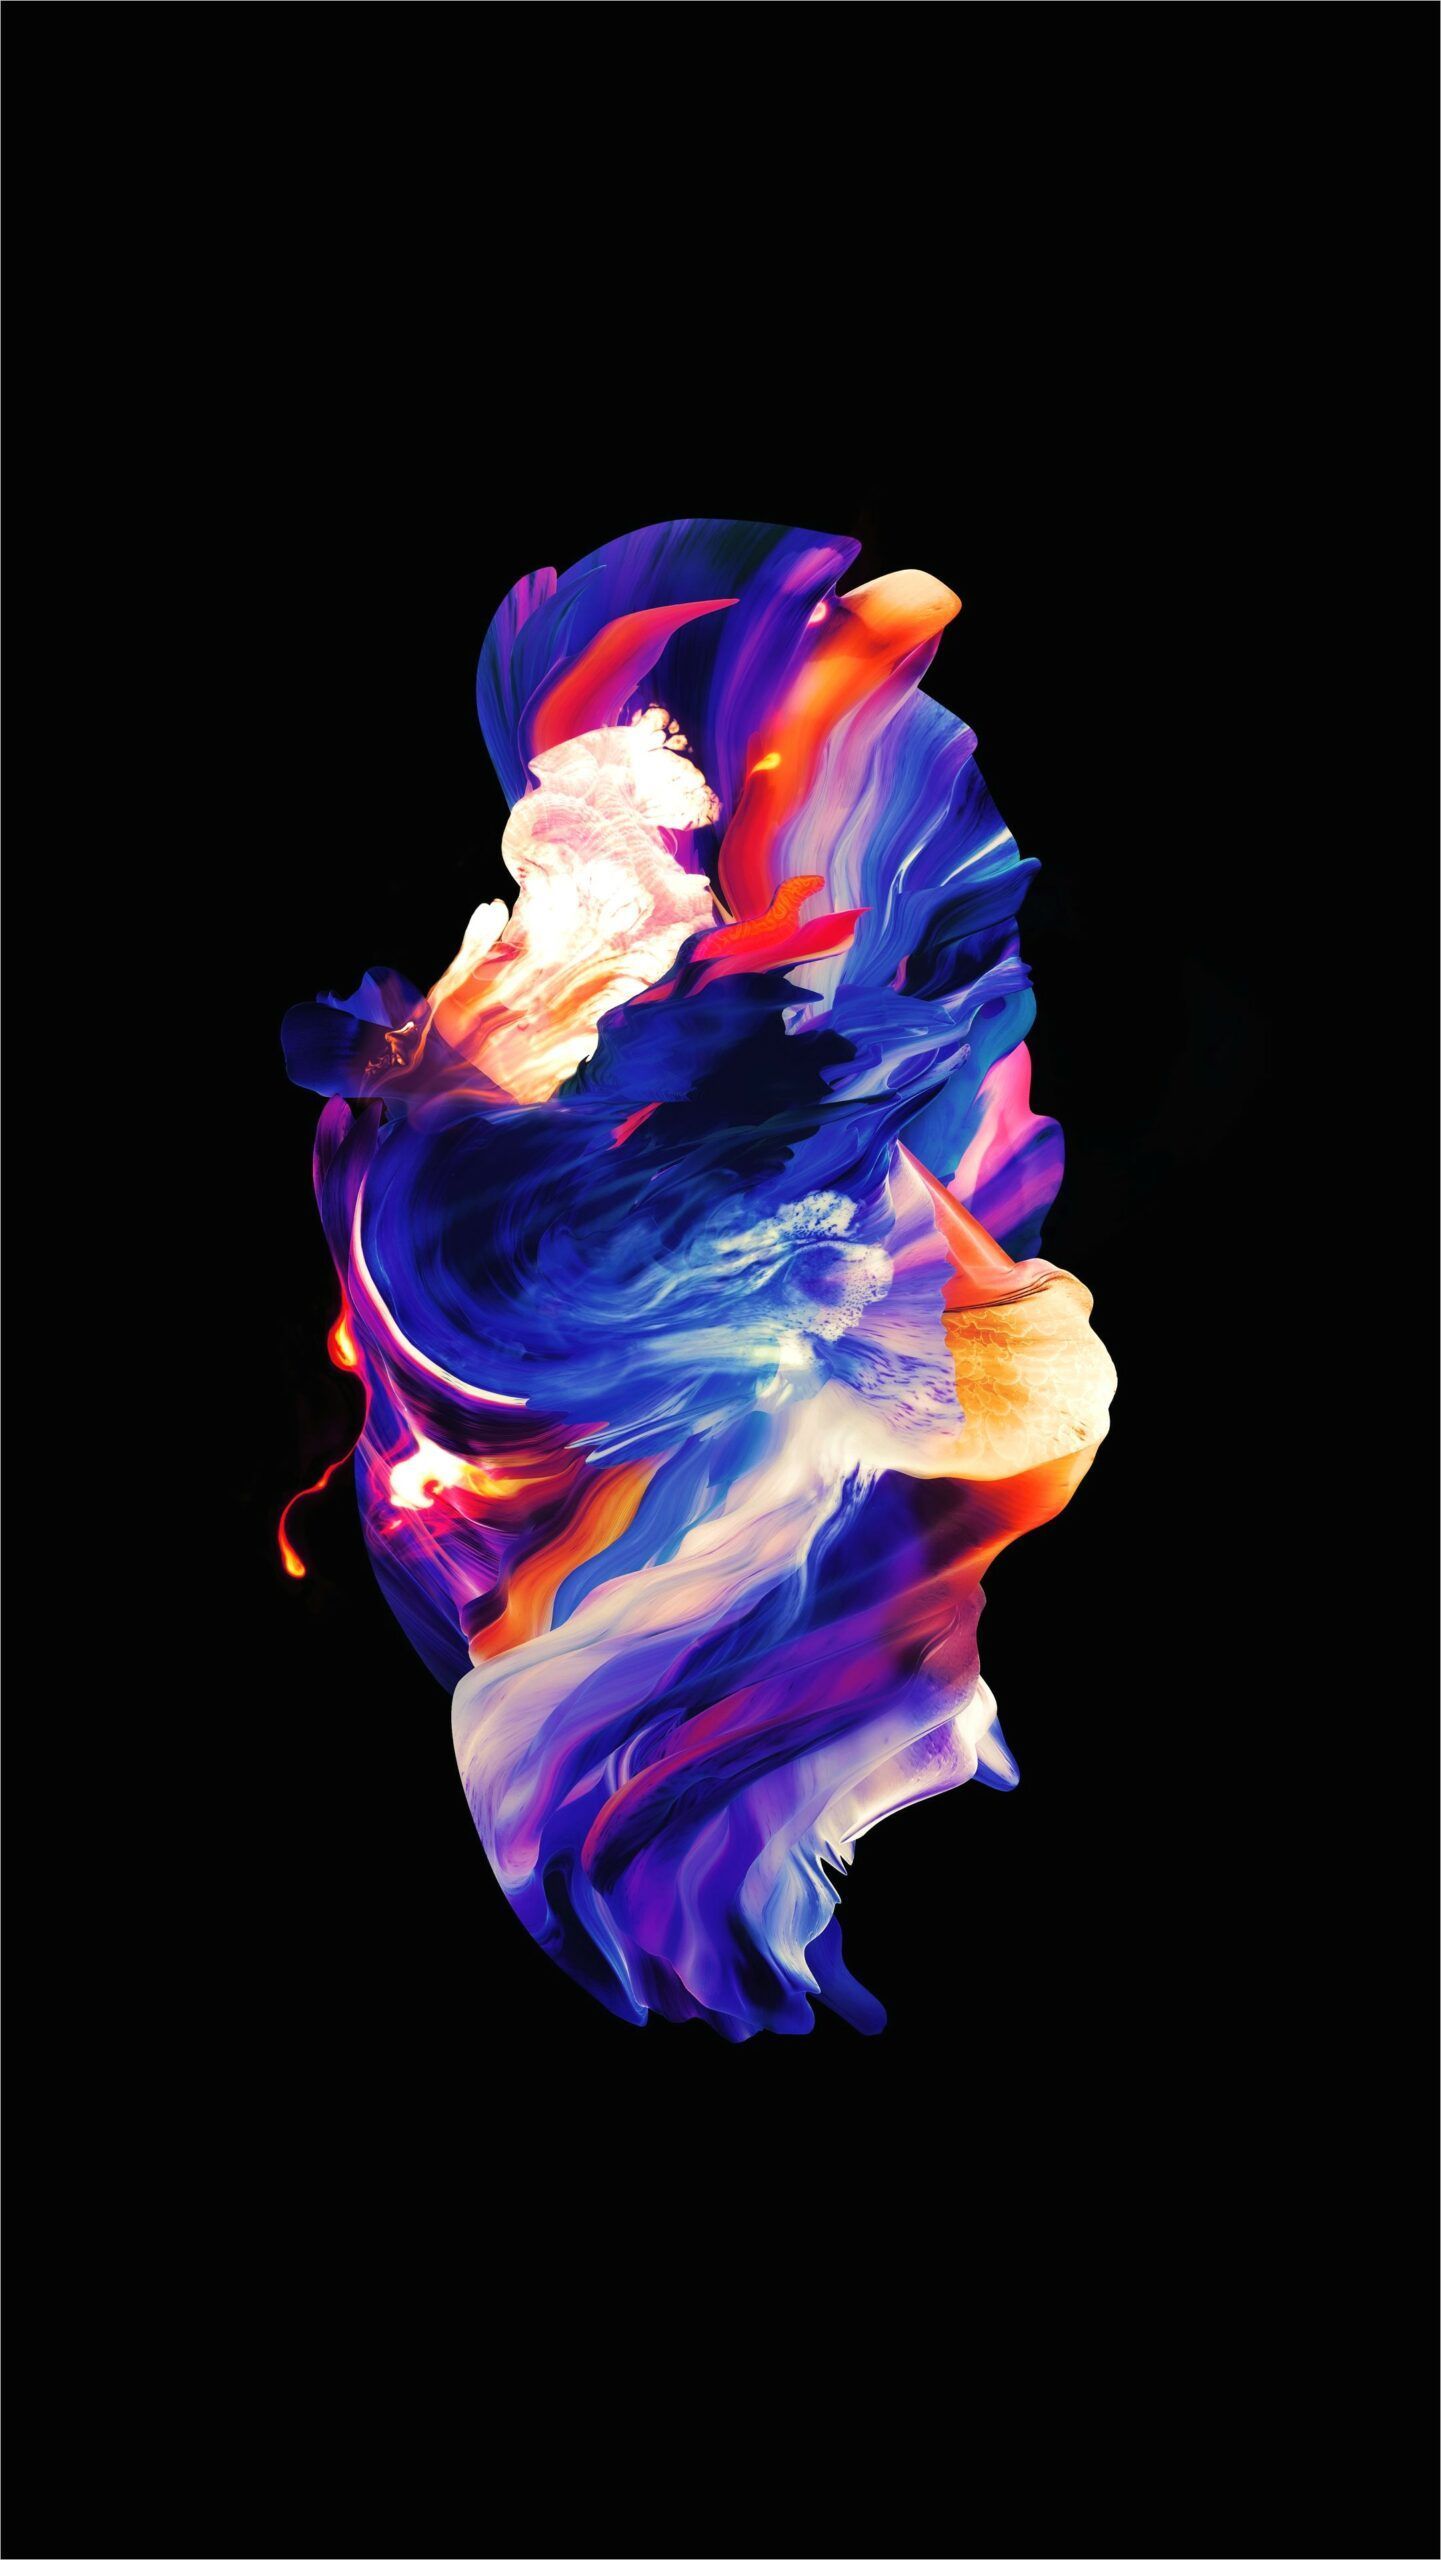 Abstract Super Amoled Wallpapers - Wallpaper Cave